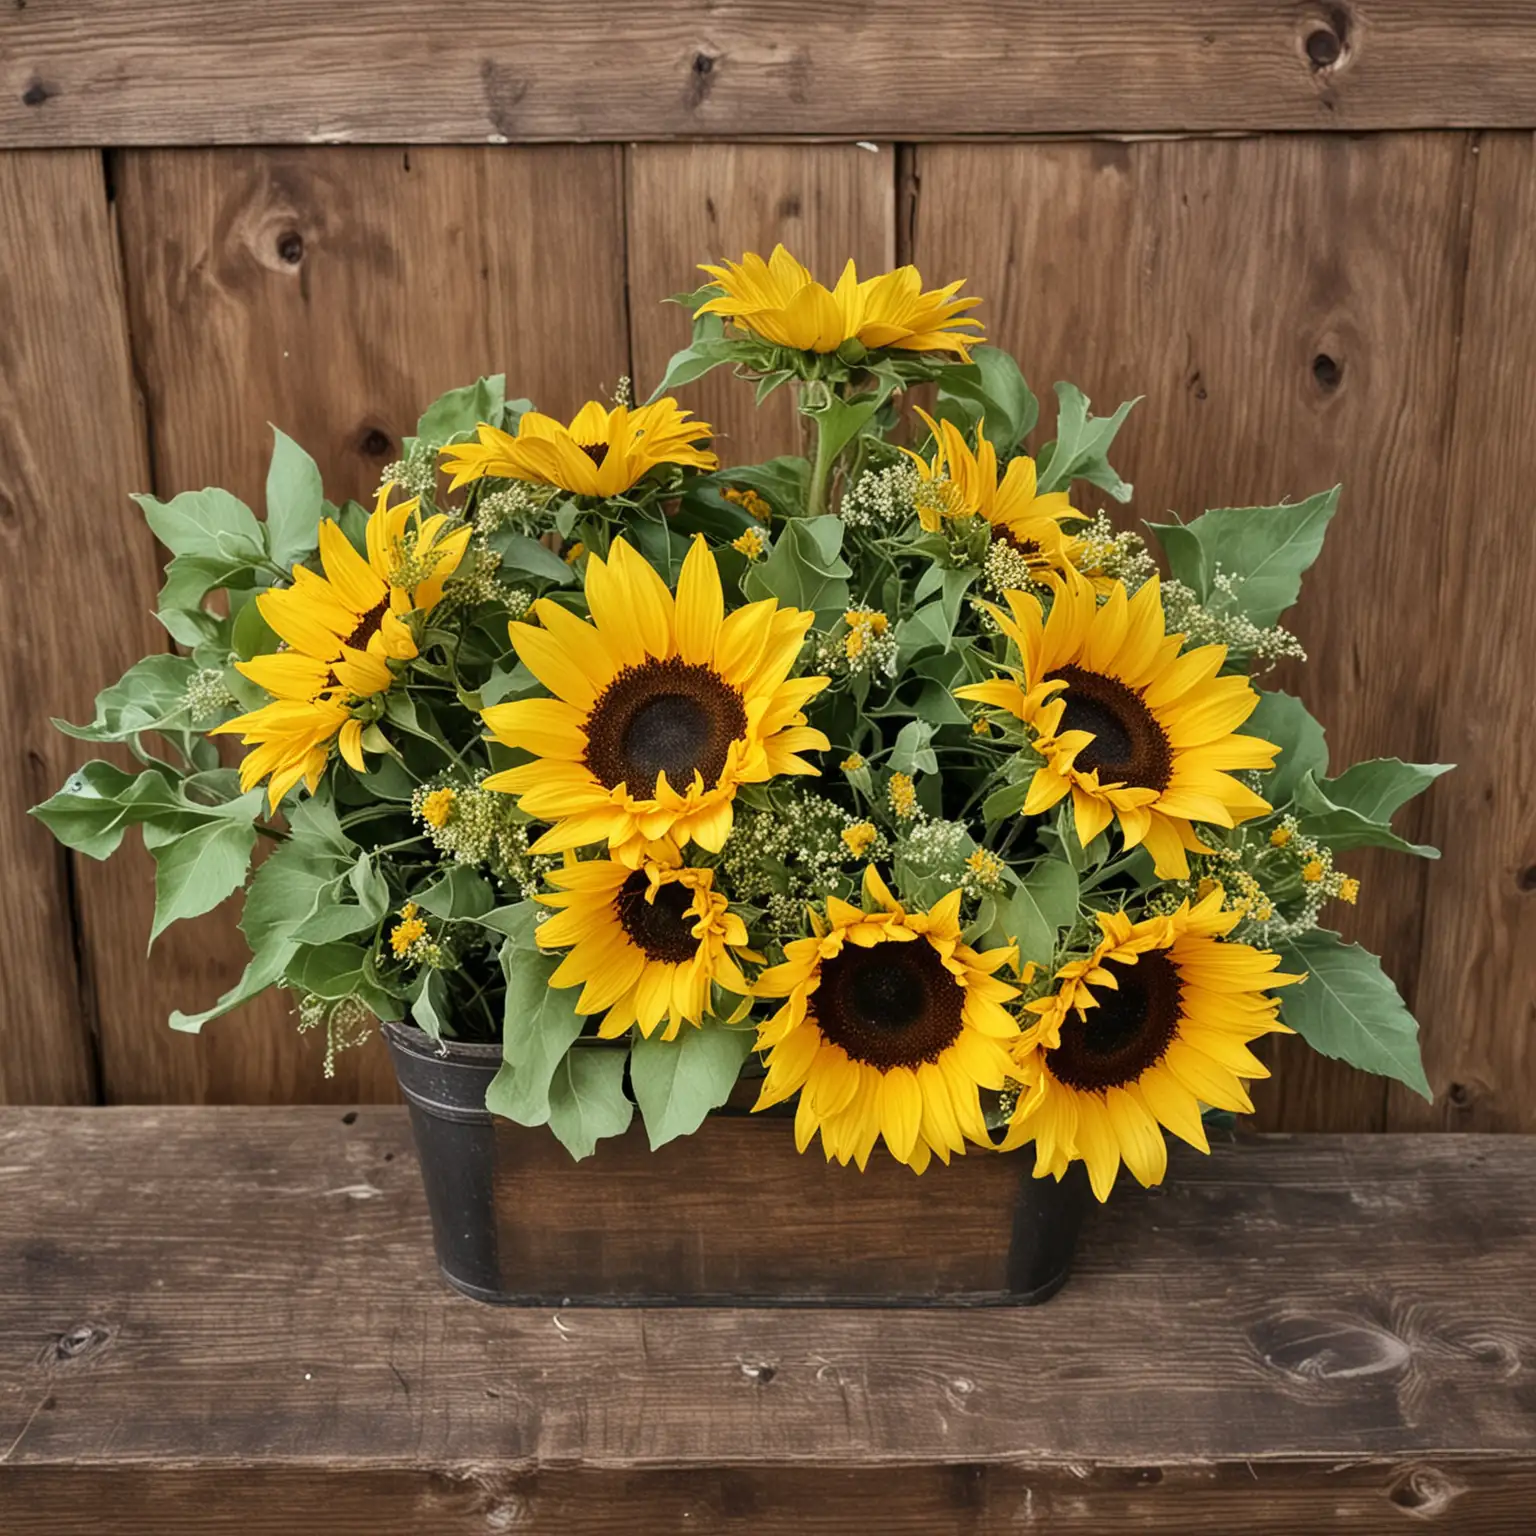 a simple sunflower centerpiece that is in a rustic container